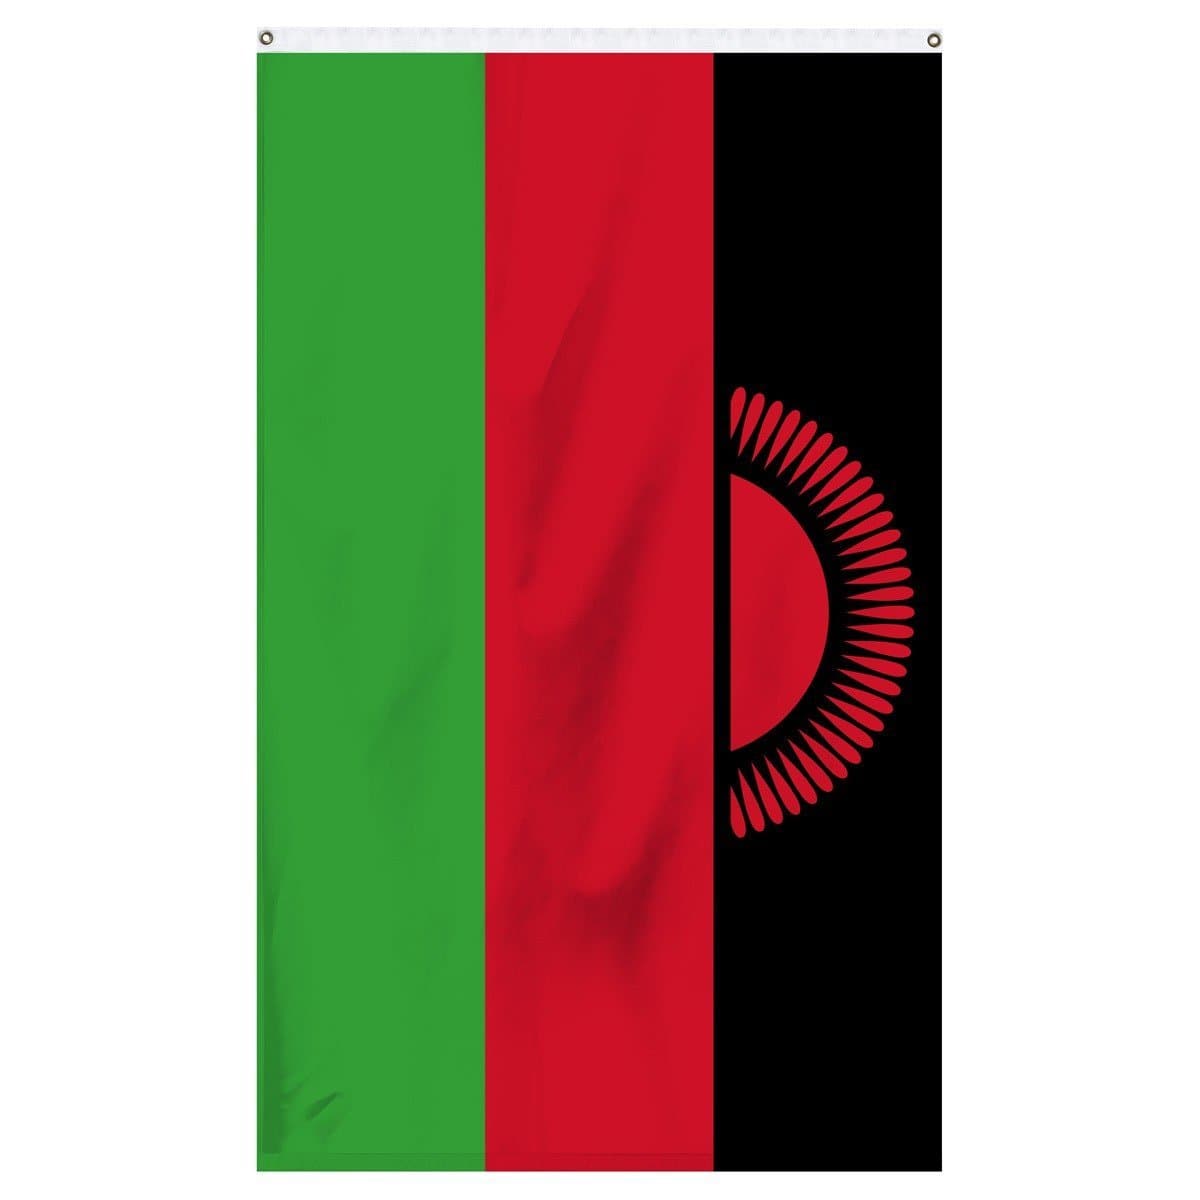 The national flag of Malawi for flagpoles and parades for sale to buy online